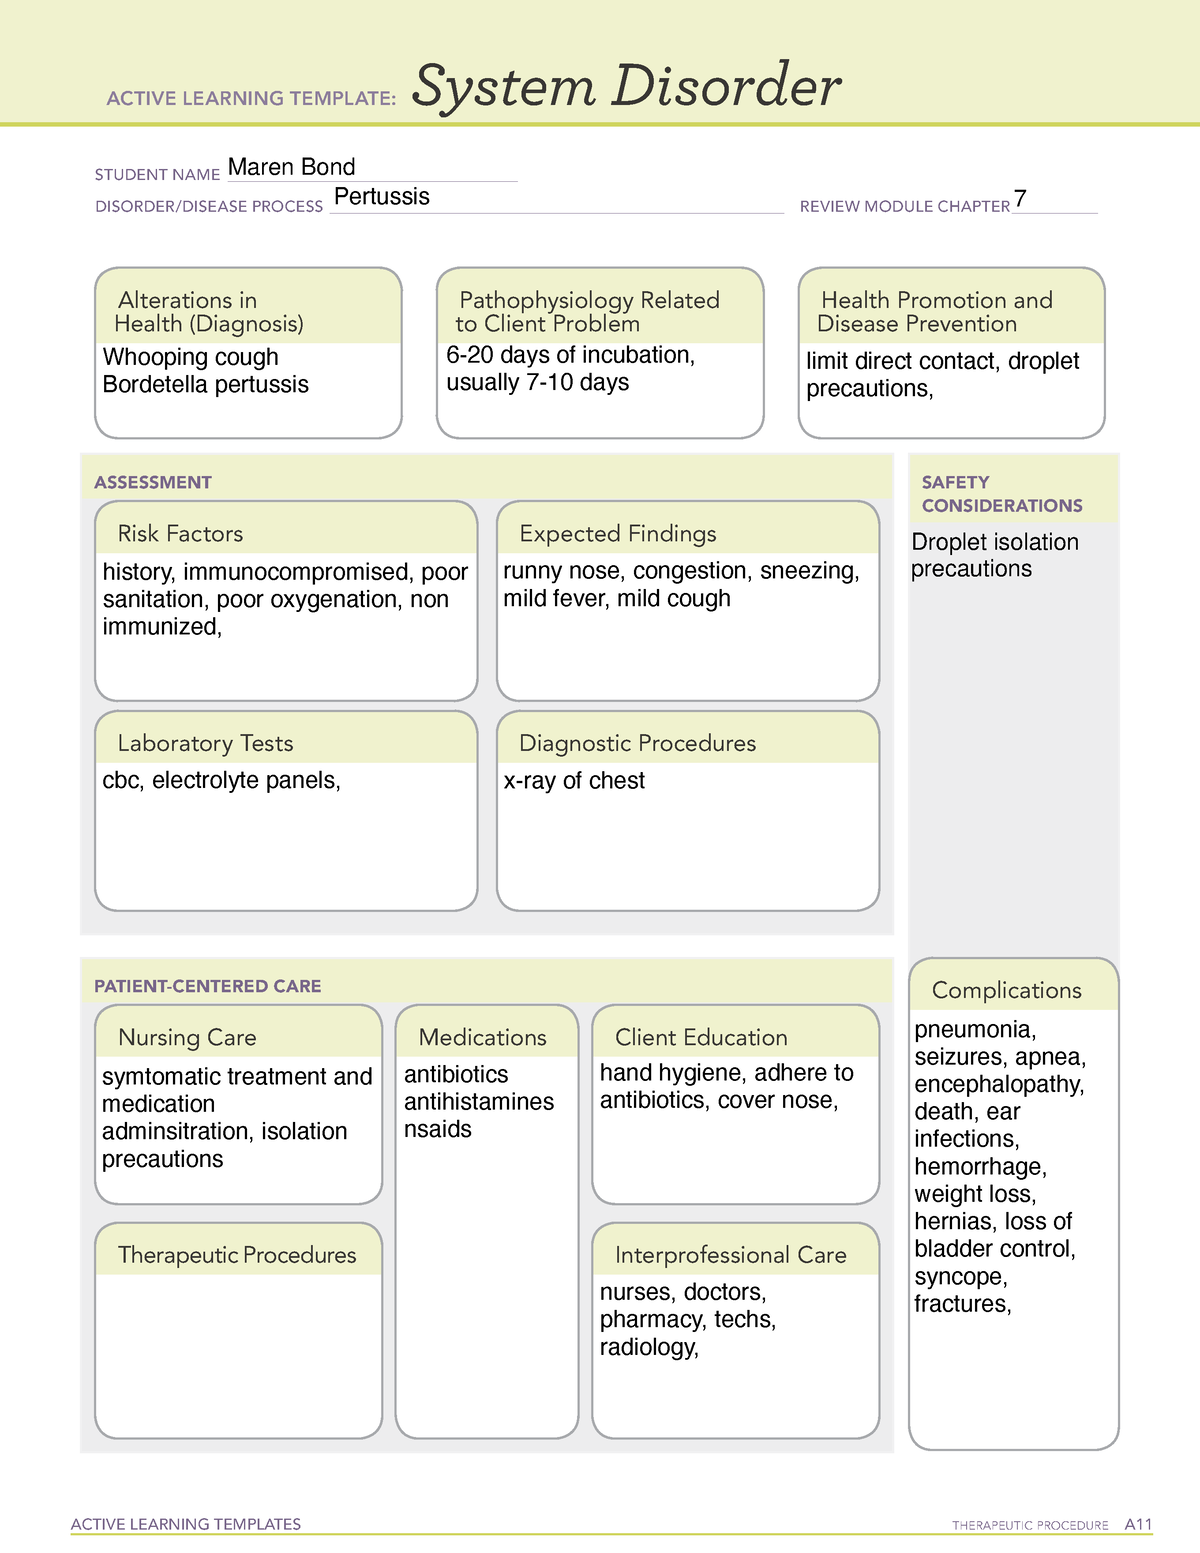 Pertussis  ati focus review  ACTIVE LEARNING TEMPLATES THERAPEUTIC